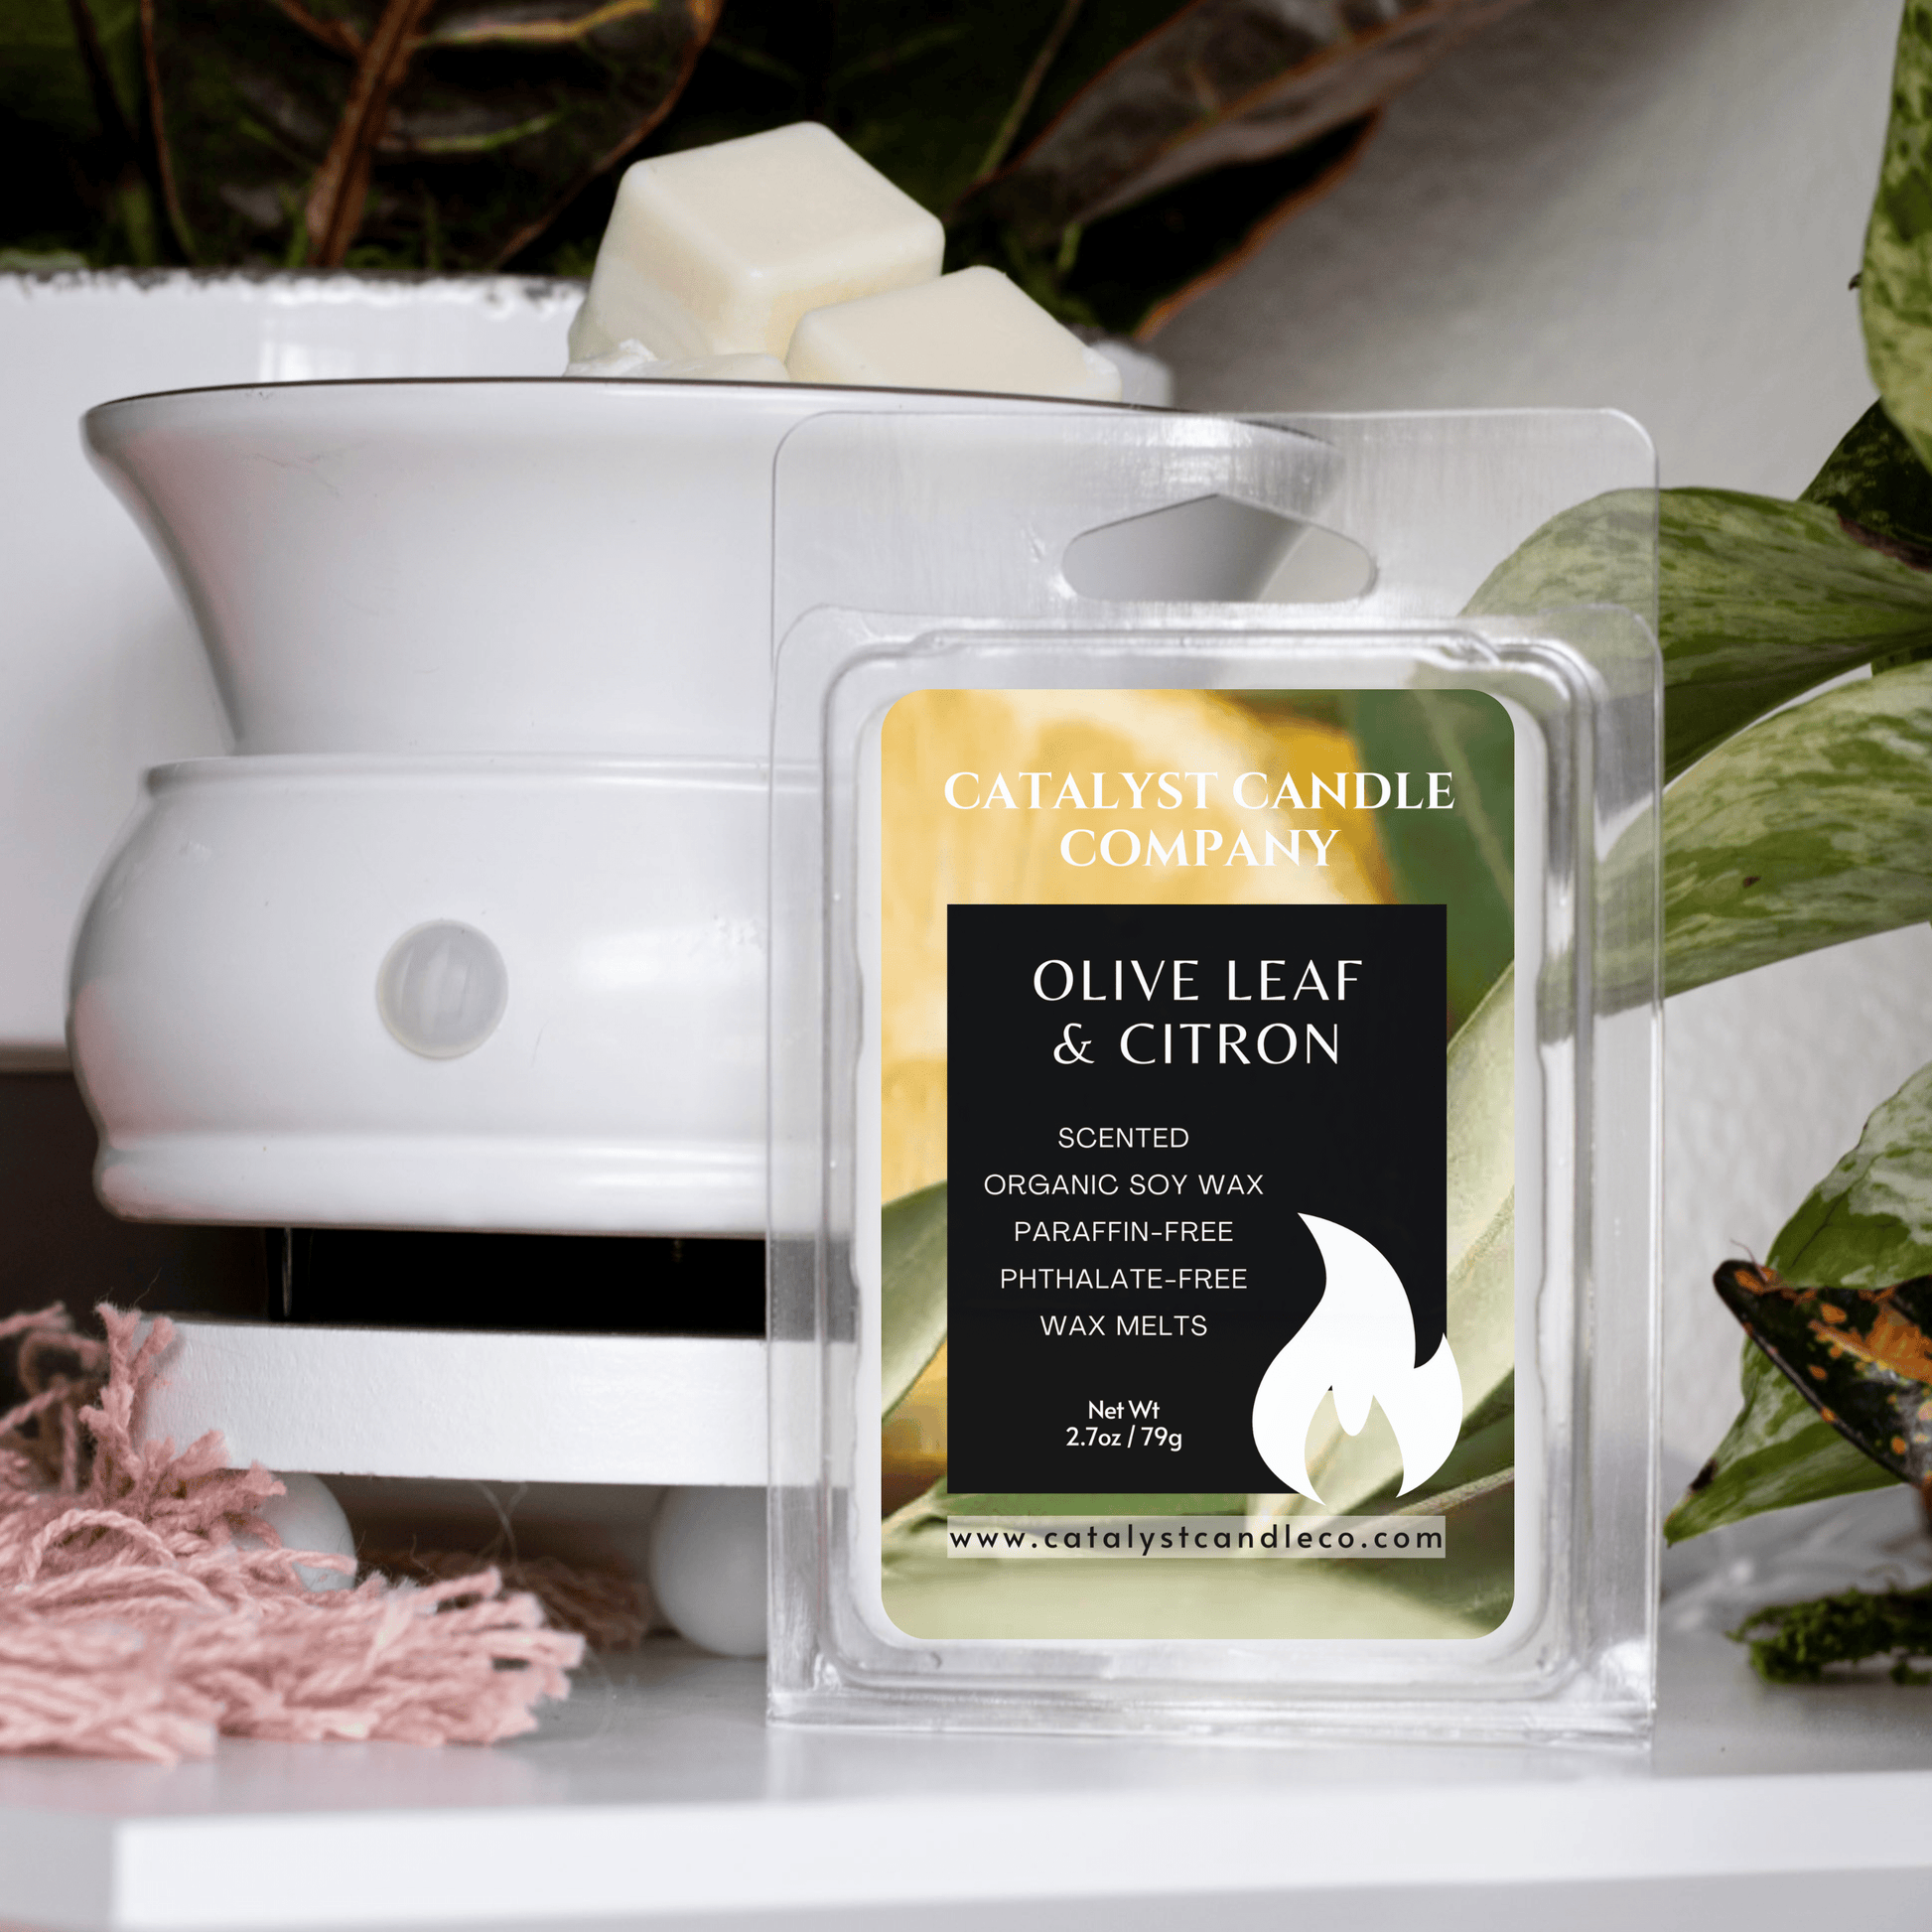 Fresh and clean aroma. Olive leaf and citron scented soy wax melts. Catalyst Candle Company, LLC